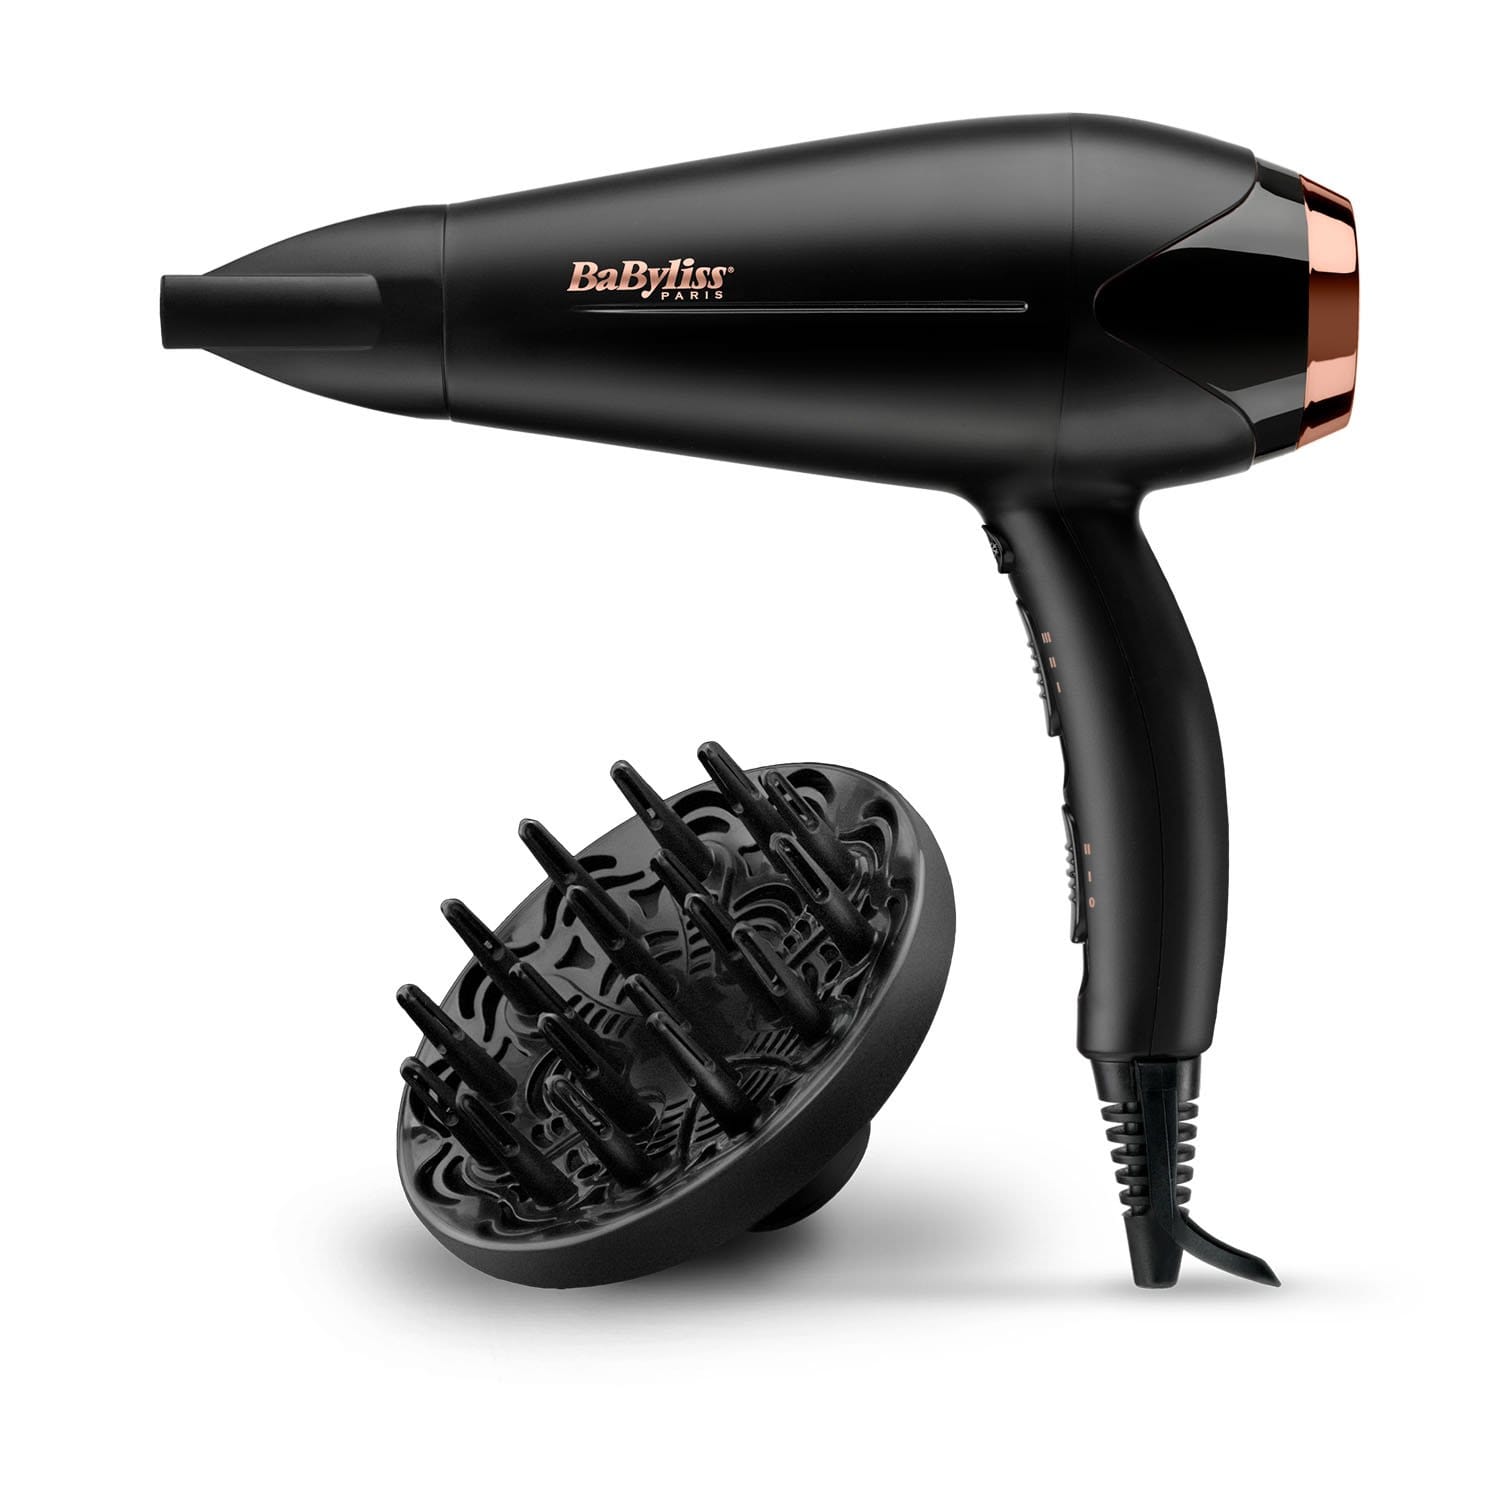 BABYLISS DC DRYER 2200W BLACK GLD IONIC DIFFUSER 3 HEAT 2 SPEED COOL SHOT SLIM NOZZLE - D570DSDE